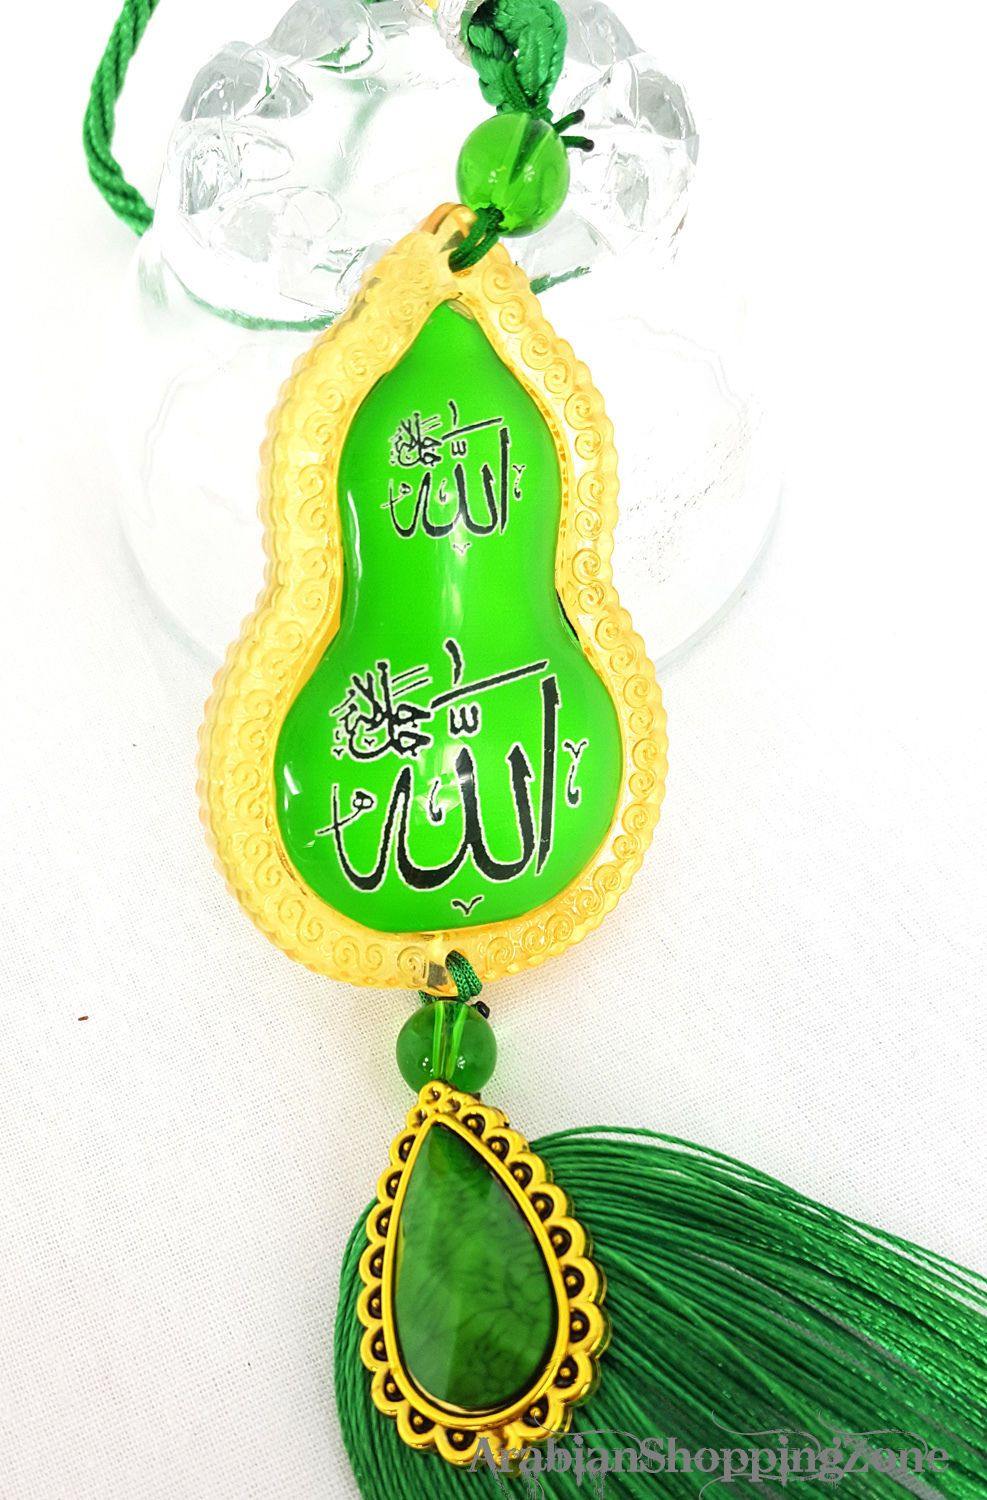 Colorful Islamic Car Hanging/Decoration Piece Ornament ALLAH (SWT) and MUHAMMAD (PBUH) - Arabian Shopping Zone